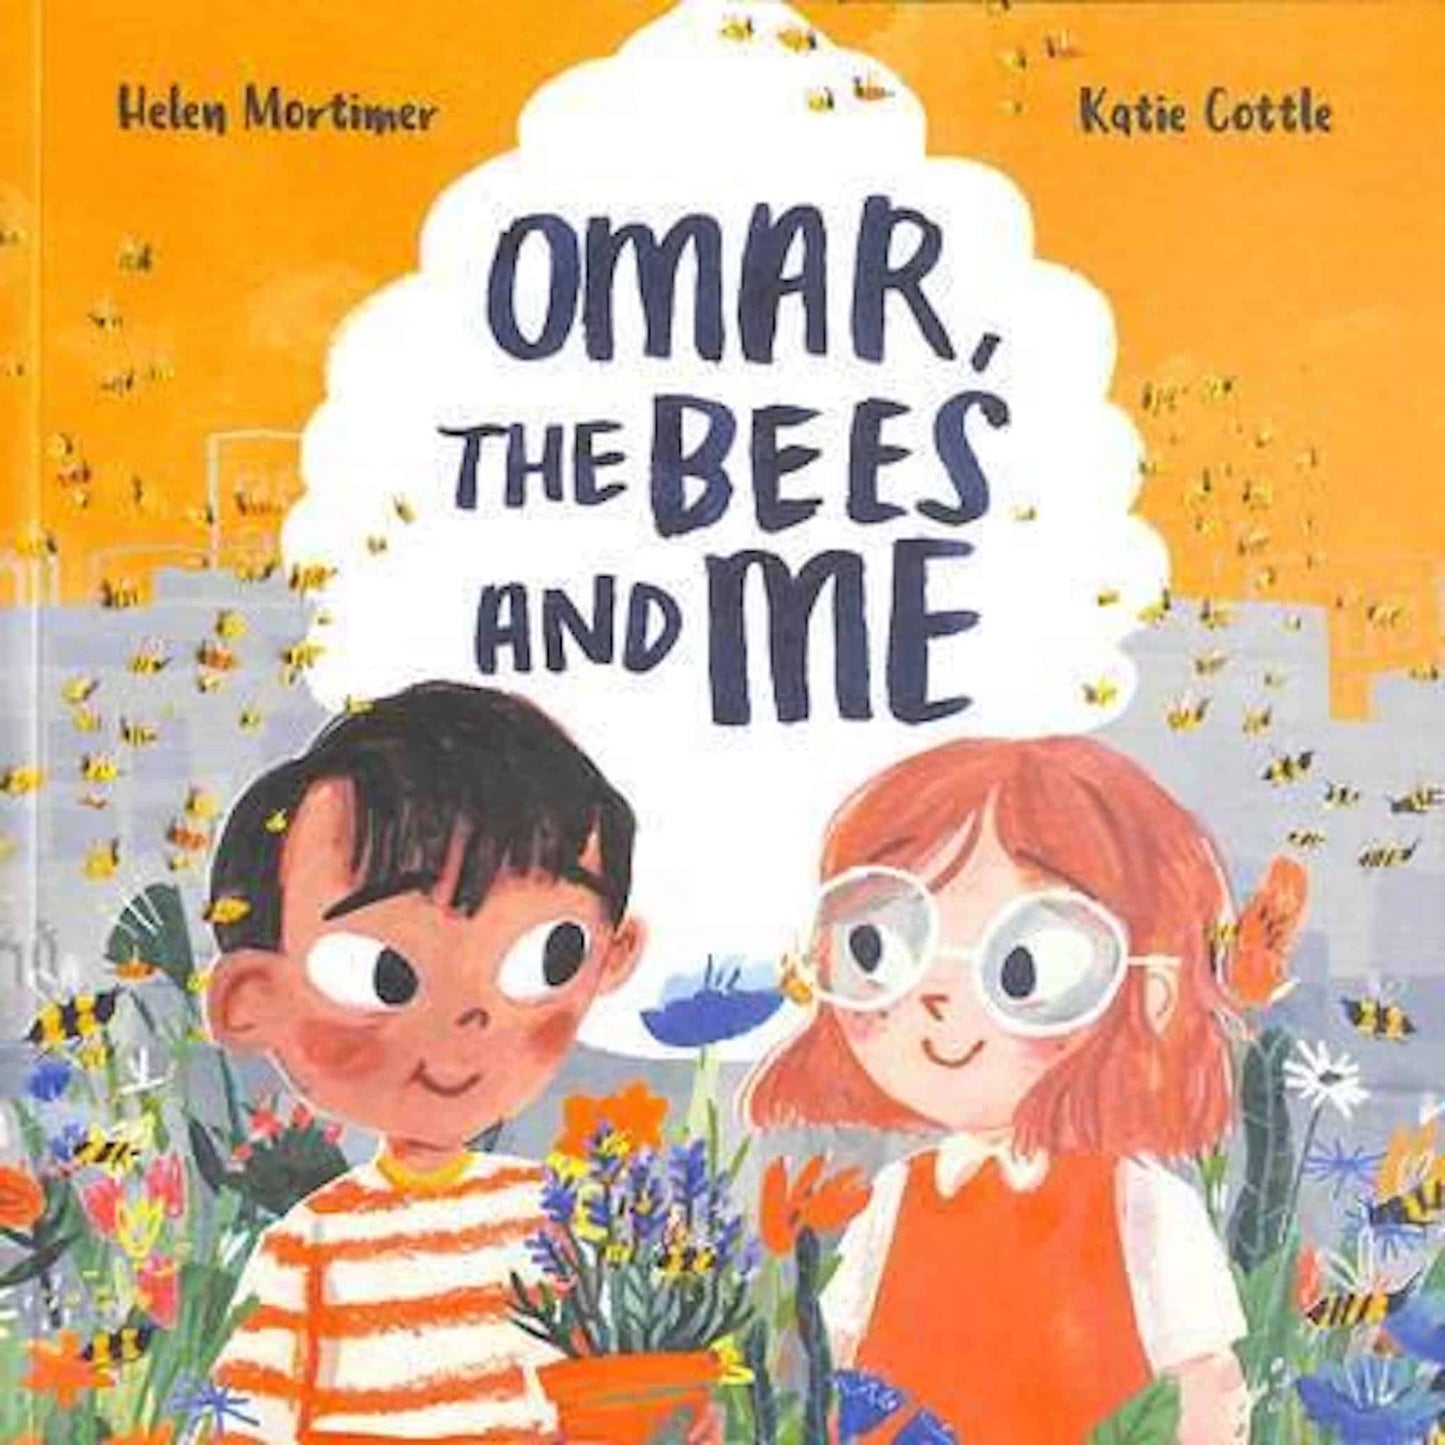 Helen Mortimer & Katie Cottle - Omar, the bees and me